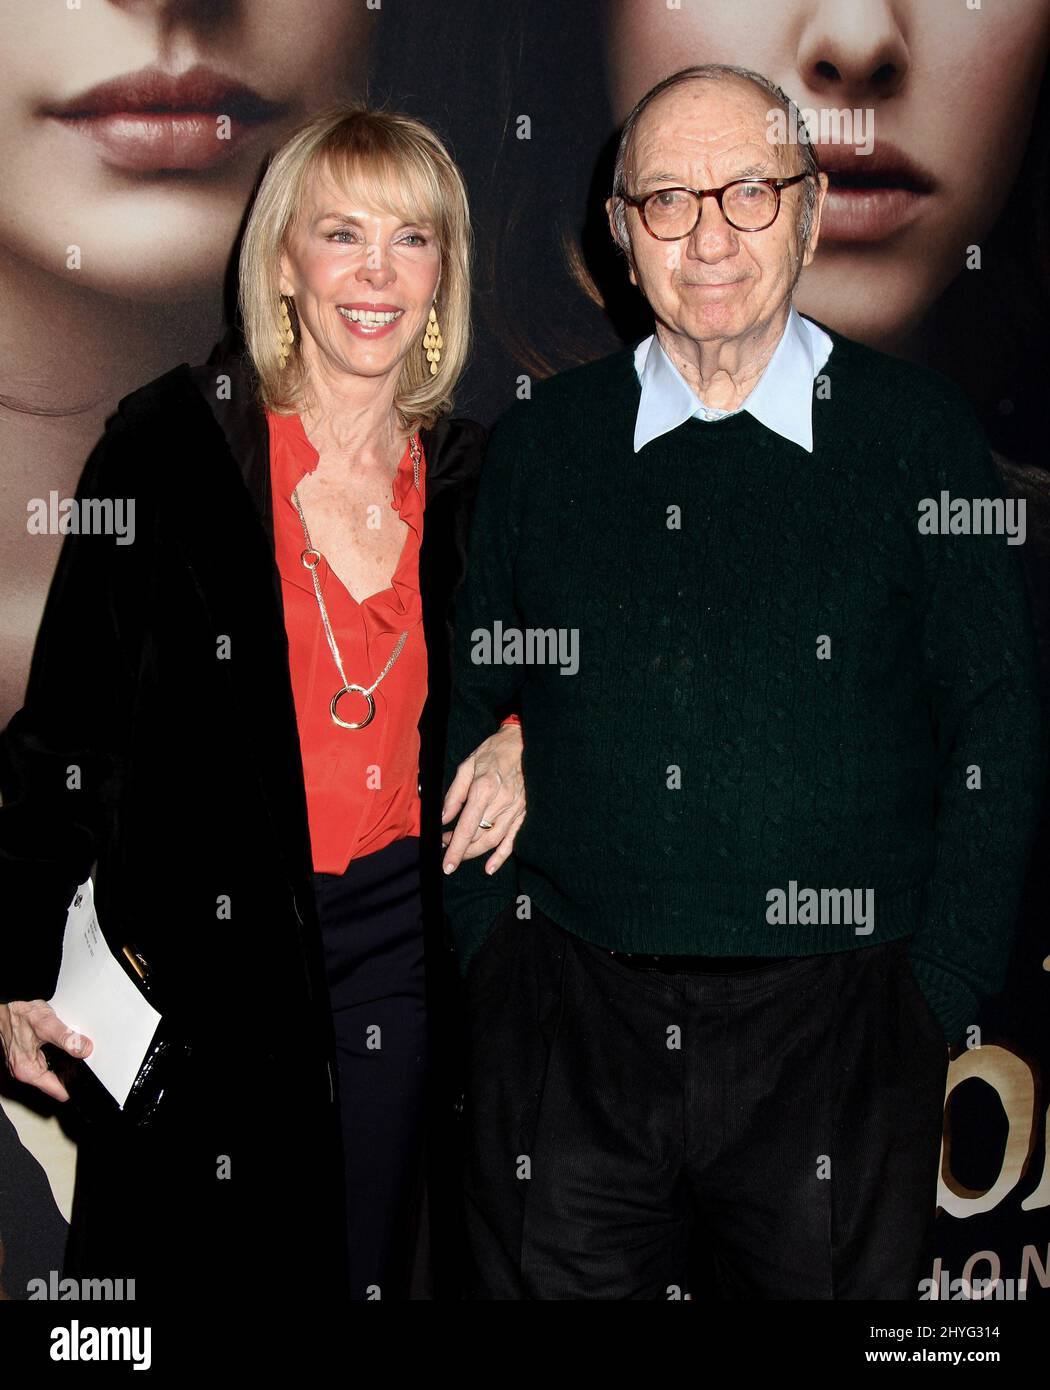 American playwright, screenwriter and author Neil Simon passed away today at the age of 91 in Manhattan. Neil Simon and wife Elaine Joyce 'Les Miserables' American Premiere - Held at The Ziegfeld Theatre on December 10, 2012. Stock Photo